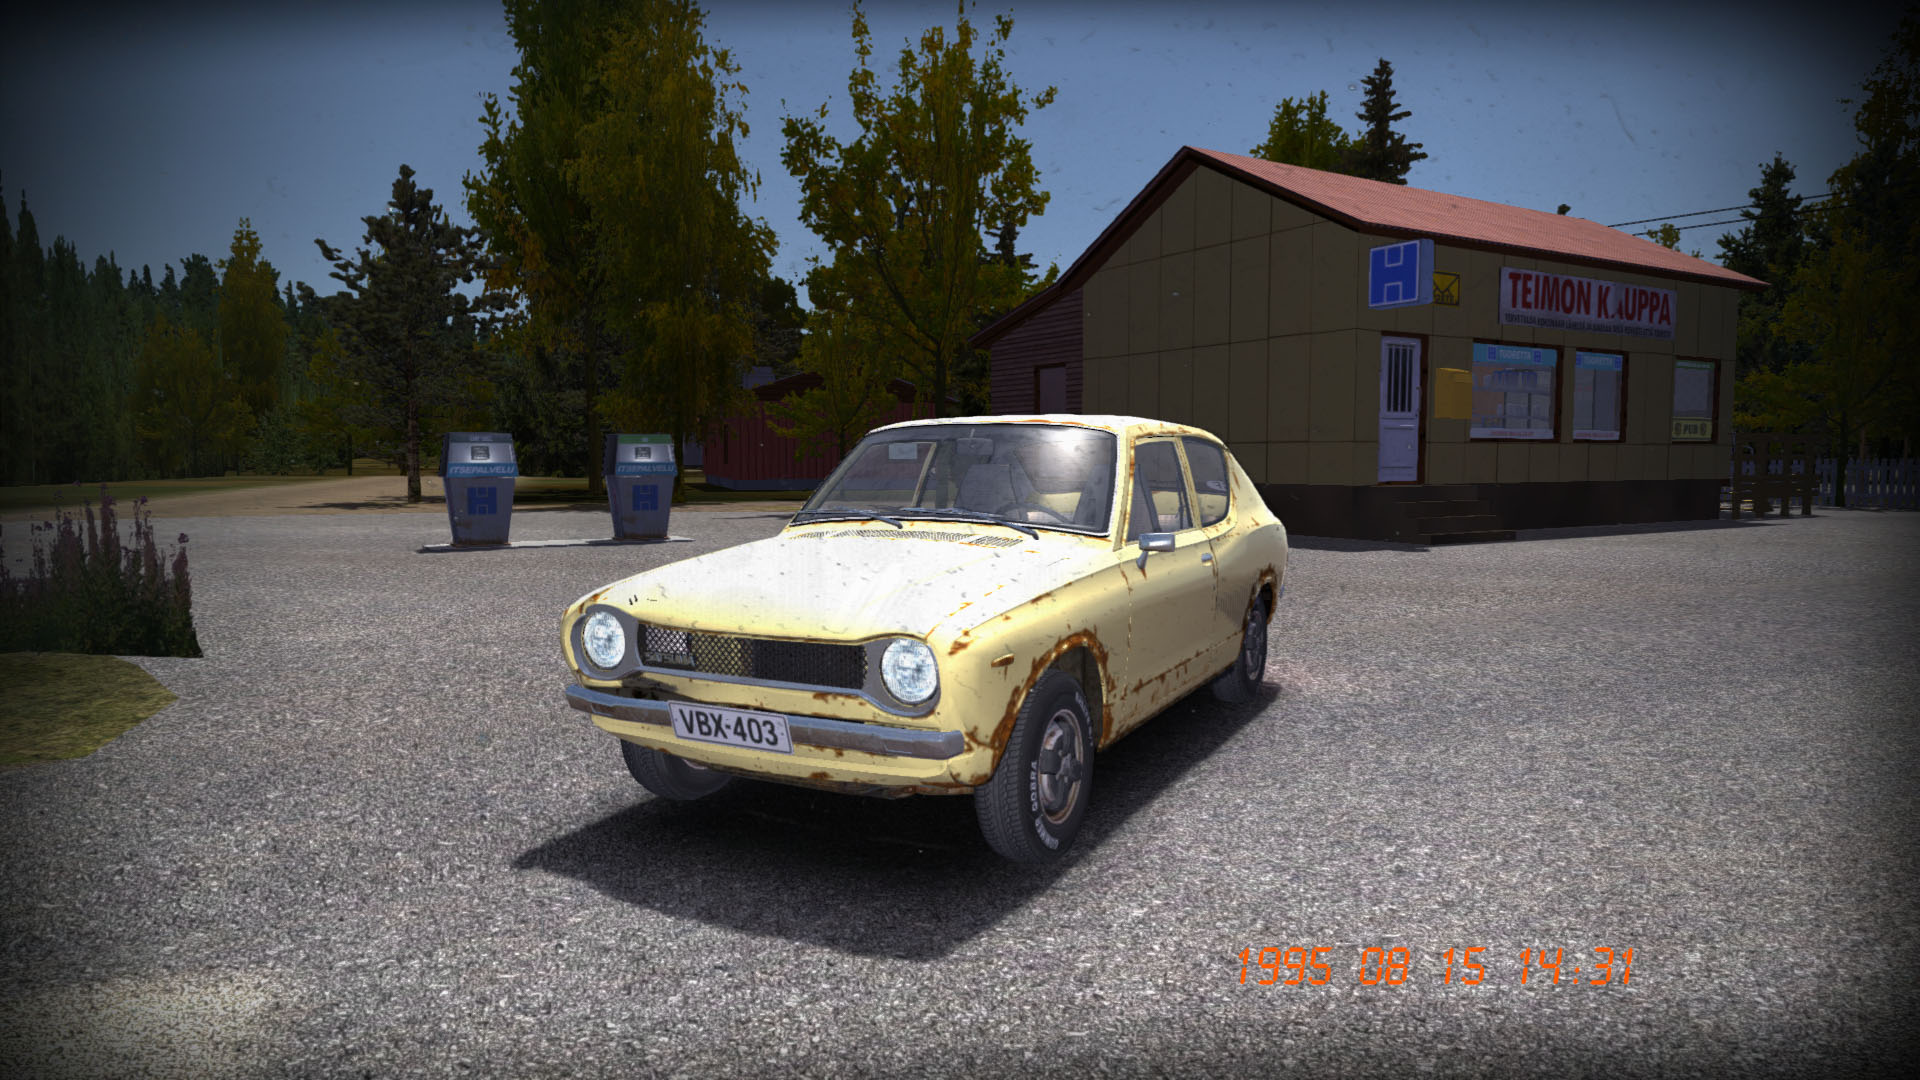 My Summer Car - How to take good photos?